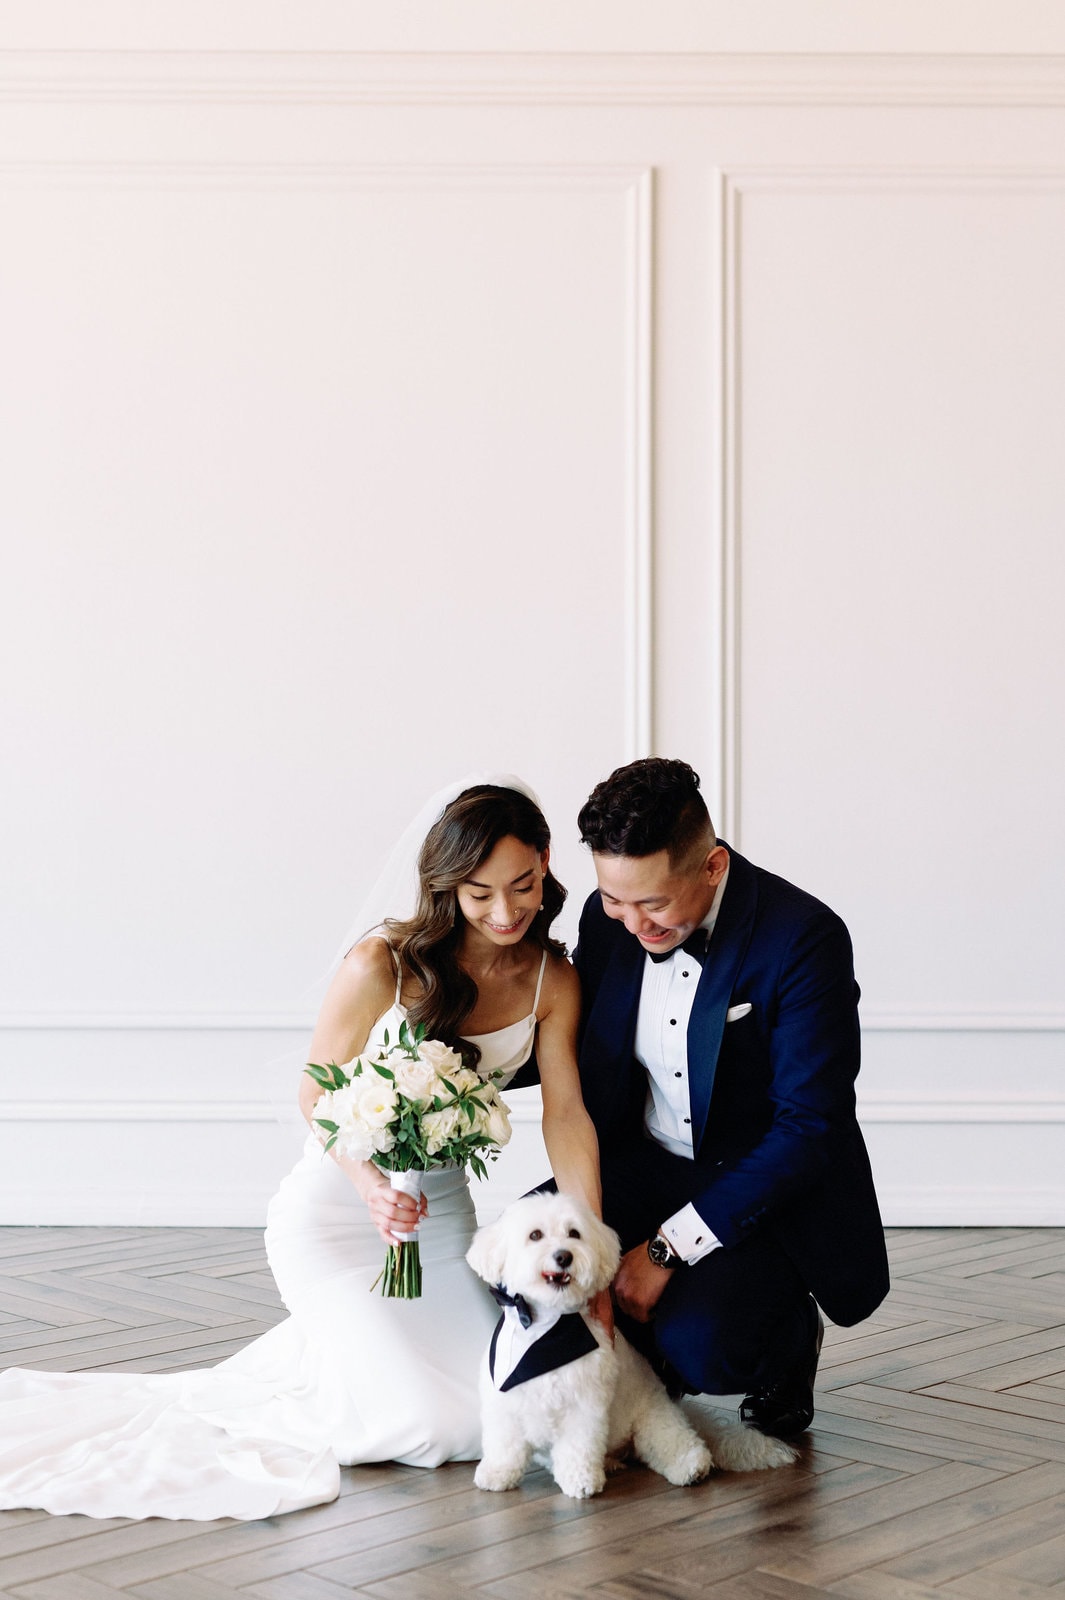 Candid Moment with Dog During Family Photos on Wedding Day Toronto at Arlington Estate Wedding Venue, Modern Romantic Summer Intimate Elopement Jacqueline James Photography